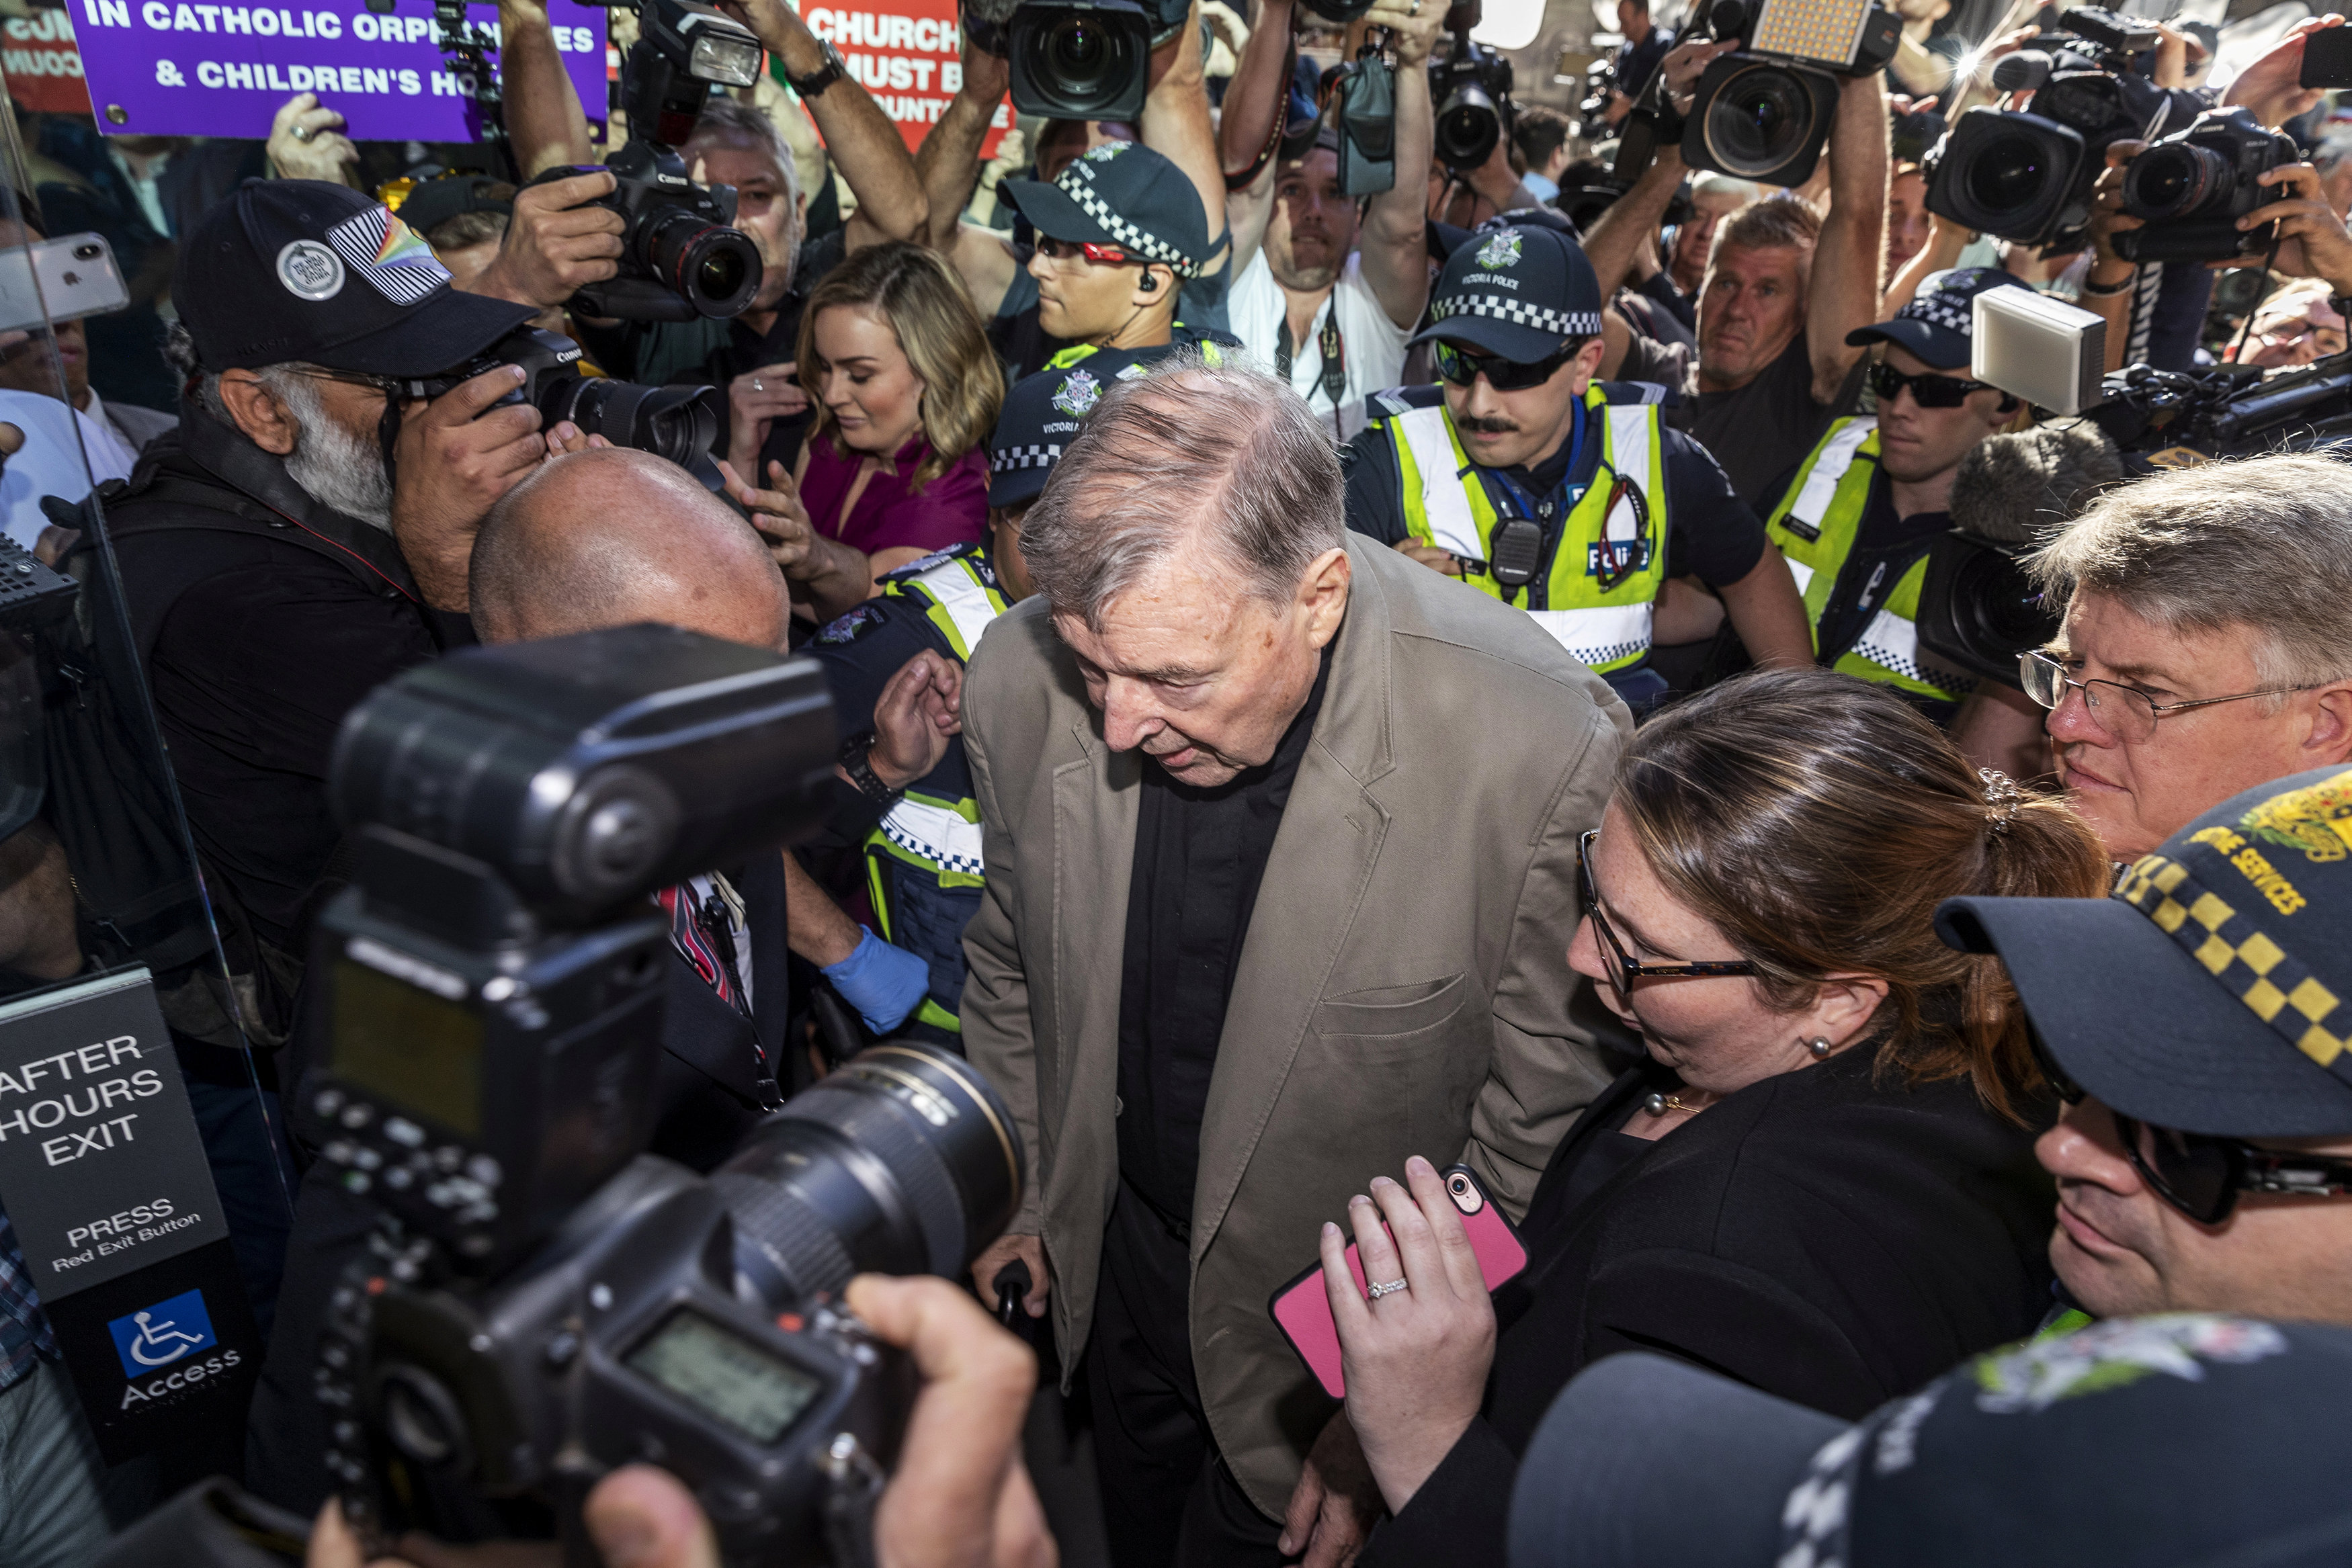 Church grapples to come to terms with Pell conviction 